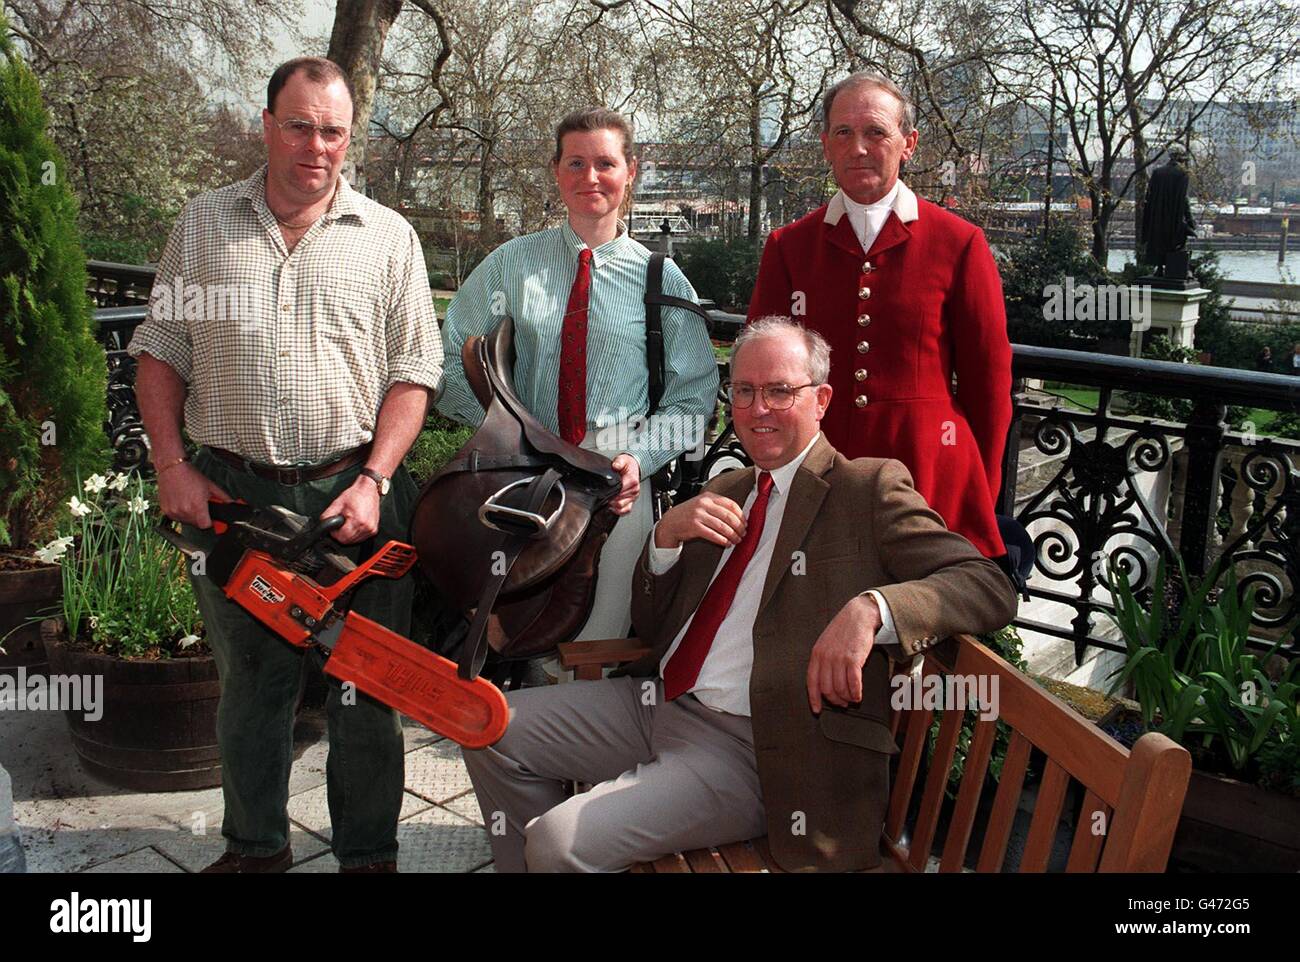 Alan Loughran, Game Keeper, Pat Maguire, Groom, Peter Jones, Huntsman and John Fretwell, Huntsman and Chairman of the Union of Country Sports workers (sitting). The Union of Country Sports Workers was launched in London today (Wednesday) with an appeal for support from all those dependent on field sports or who supply goods and services to the countryside. Mr Fretwell said more than 90,000 full time jobs were at stake, the number cound increase to 160,000 if part time worker were included. Photo by Michael Stephens/PA. Stock Photo